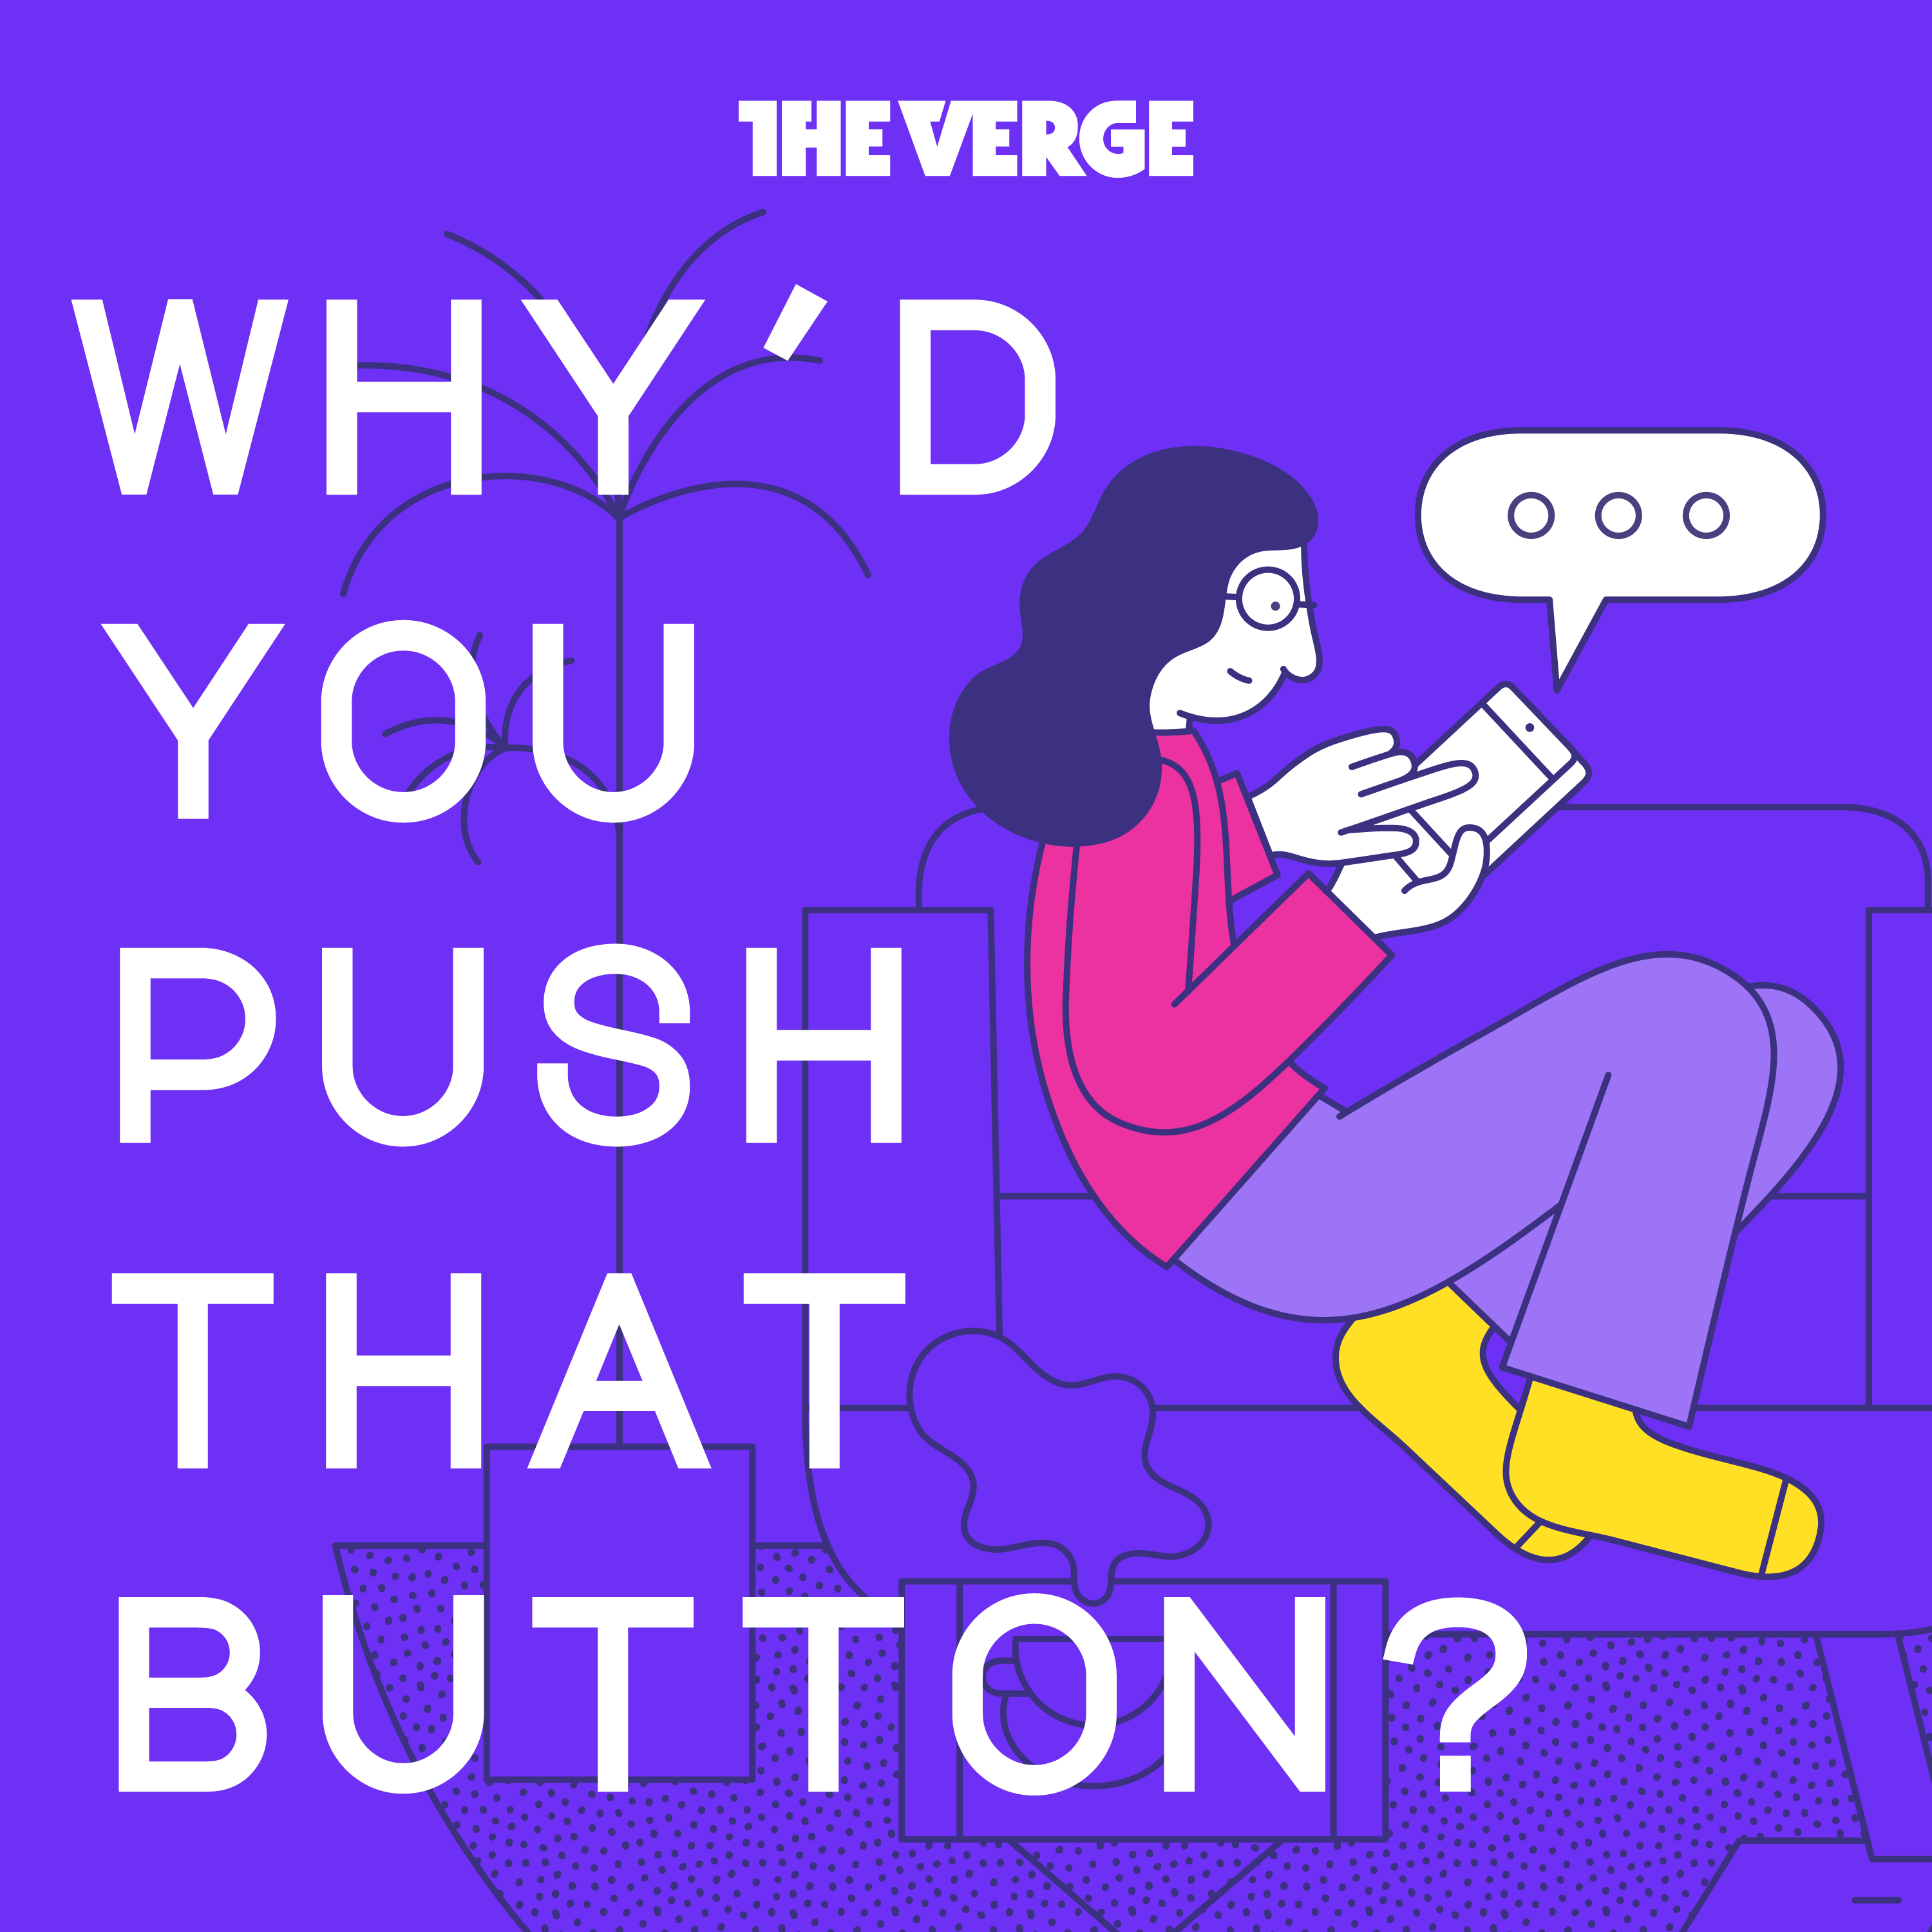 Why’d You Push That Button - reviewed